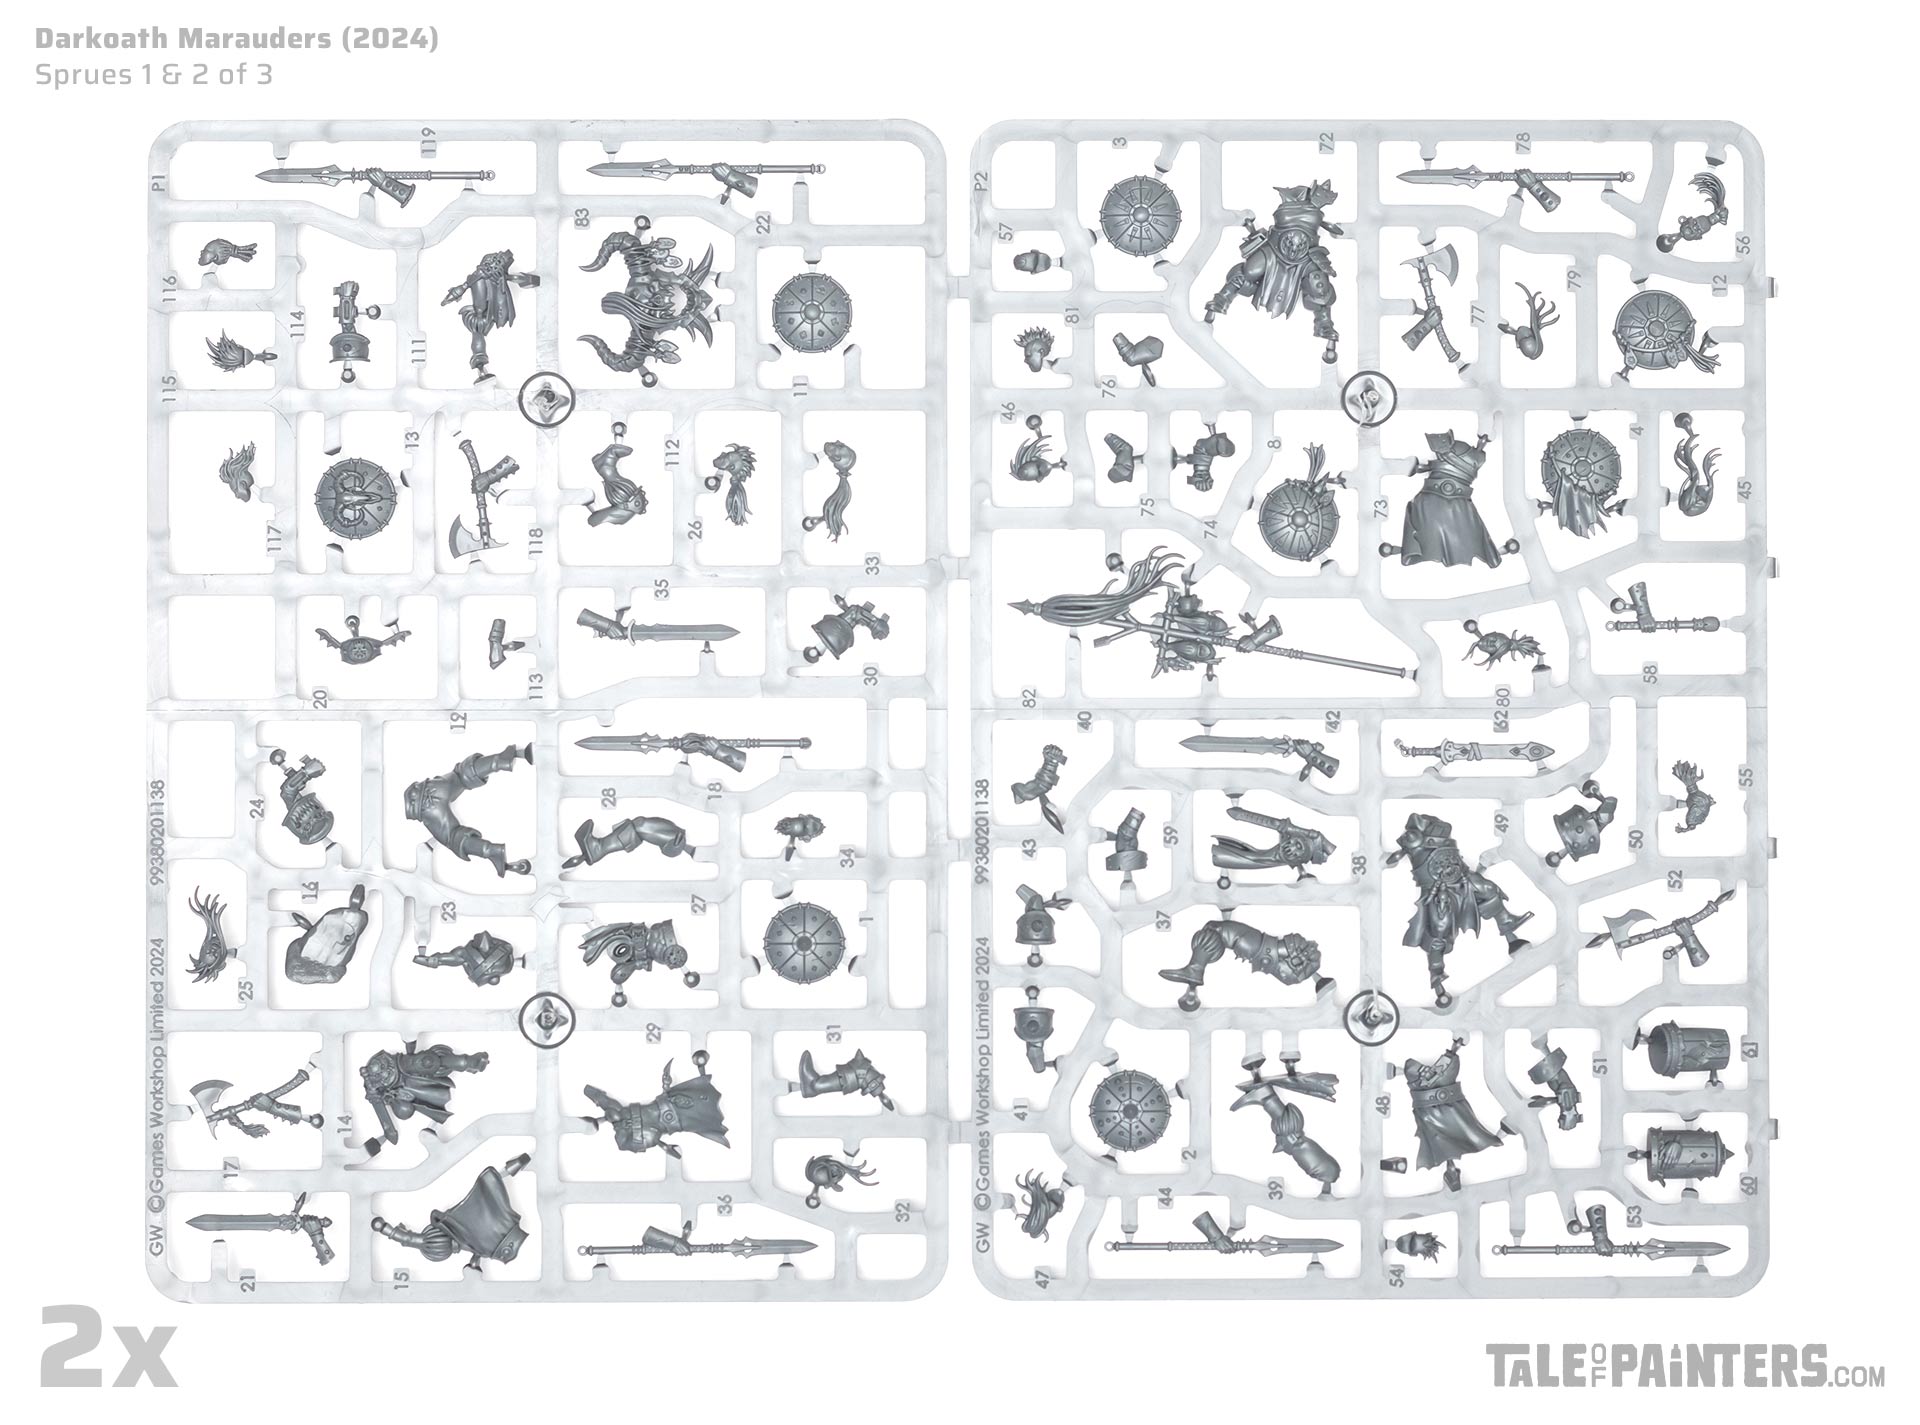 Darkoath Marauders sprues 1 and 2 review